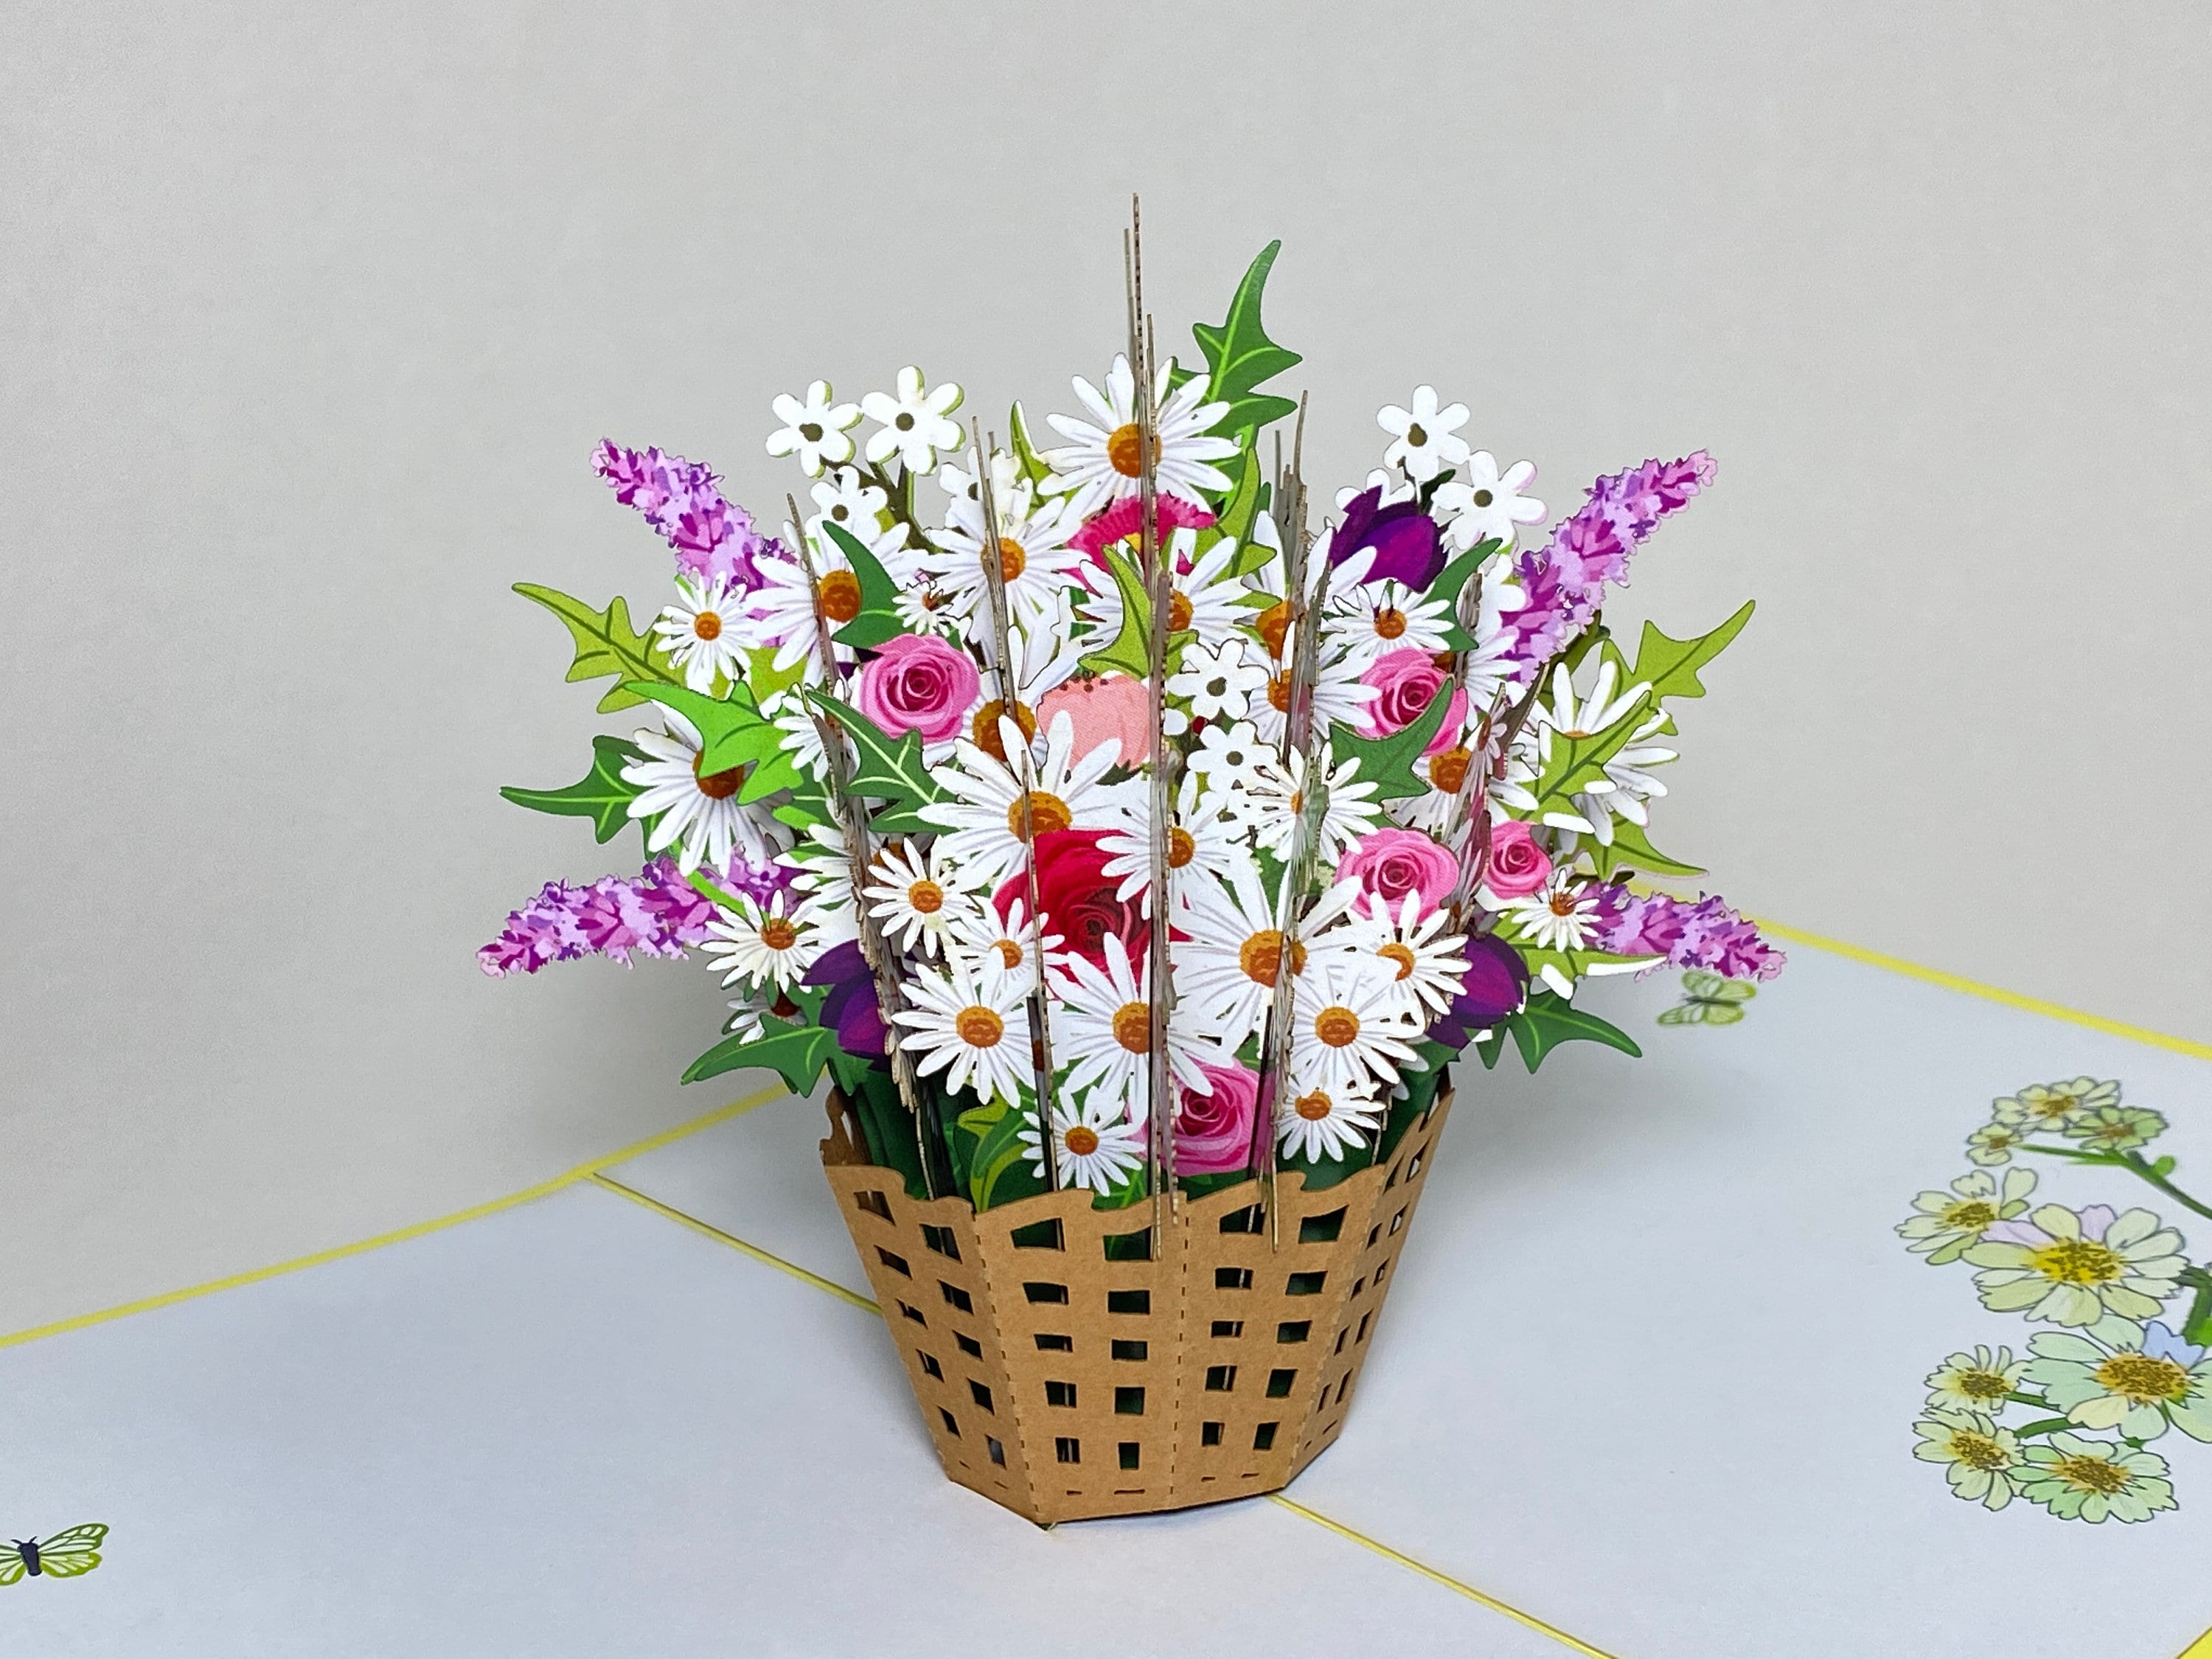 Get Well Card Blooming Daisy Basket- Pop Up Mother's Day Card Fall Flowers Thank You Card Good Luck Card Mix Flowers Birthday Card